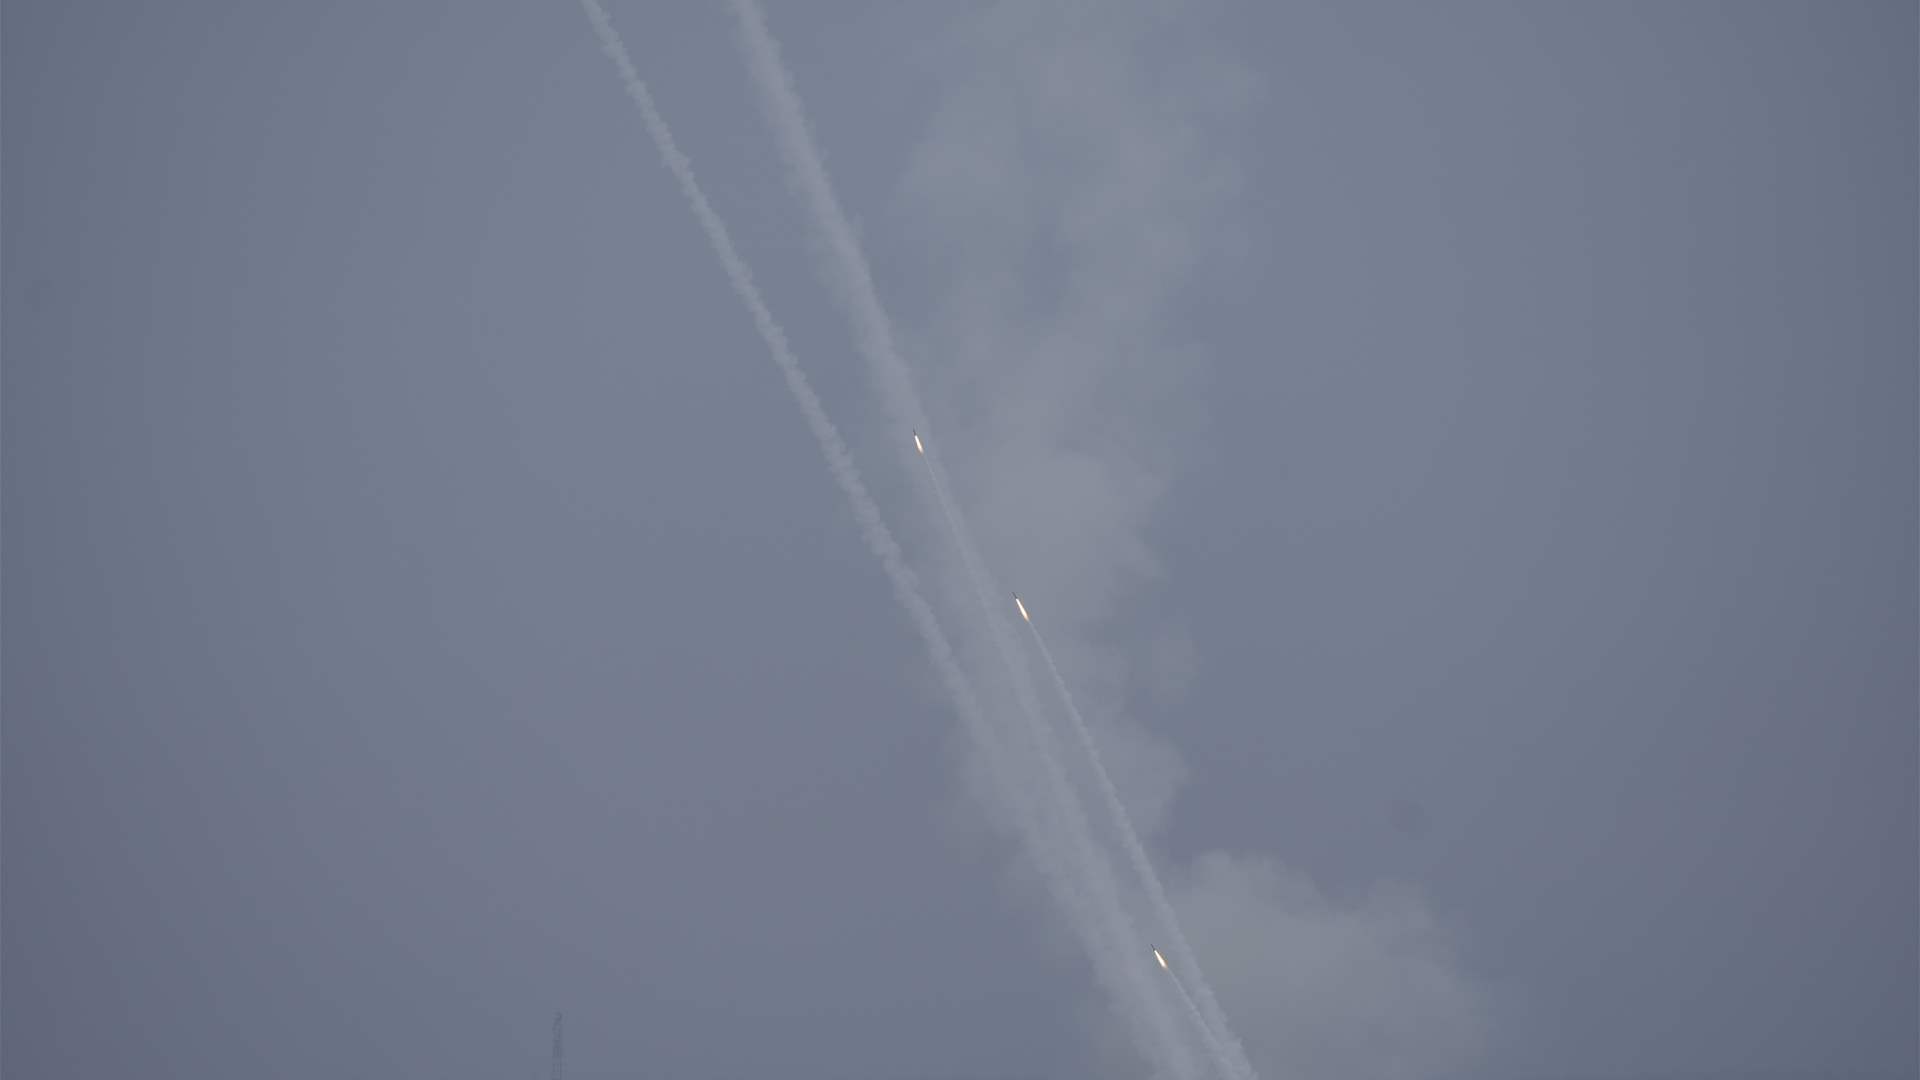 Al-Qassam Brigades: Bombing Ben Gurion Airport with a missile barrage in response to the crimes of the Israeli occupation army